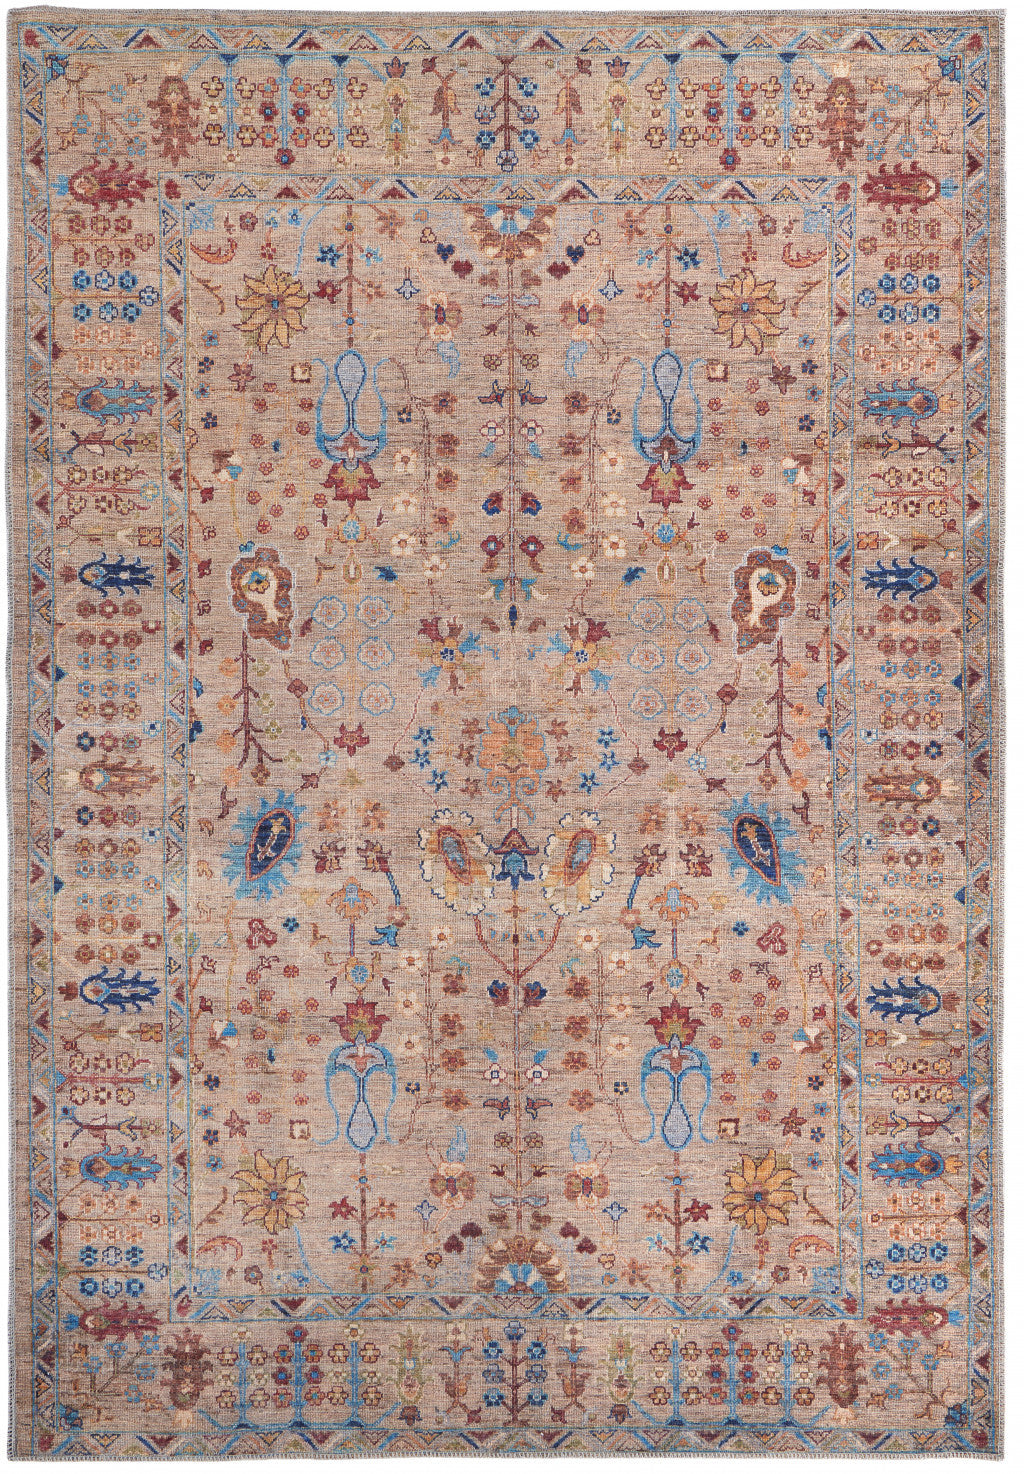 4' X 6' Tan Pink And Blue Floral Power Loom Area Rug